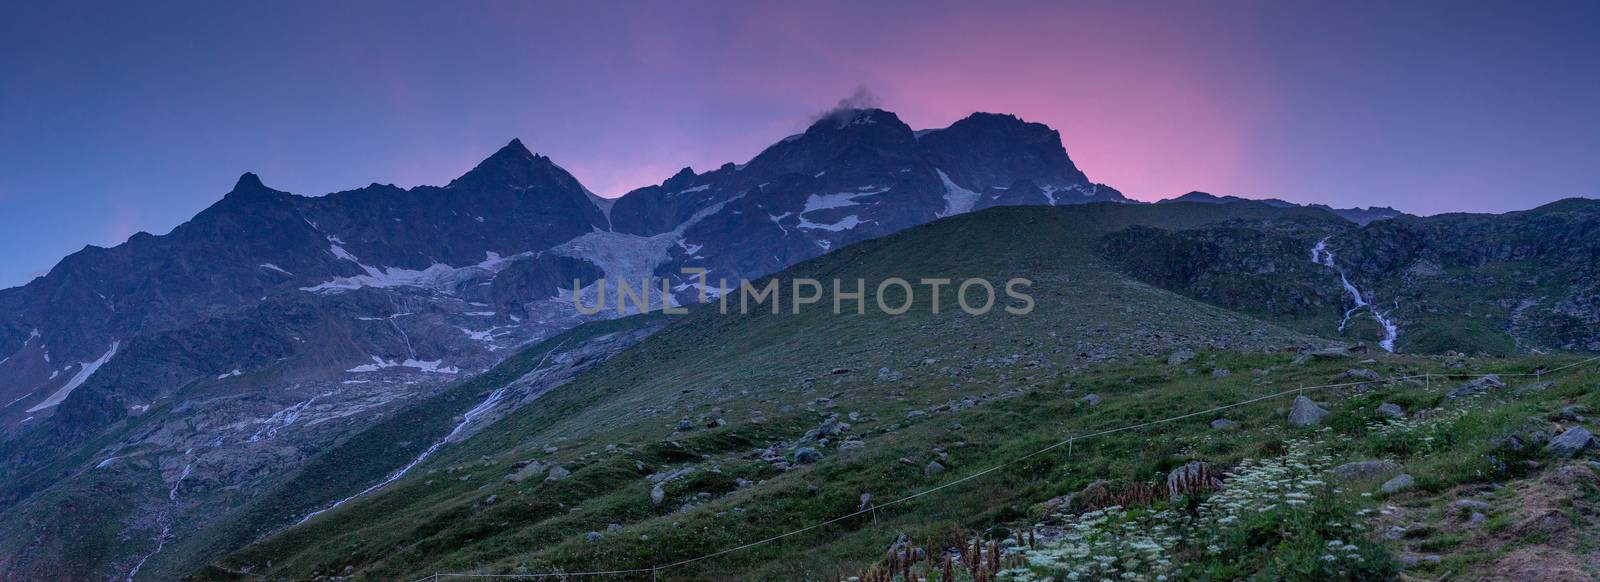 Romantic evening in mountains show summits landscape